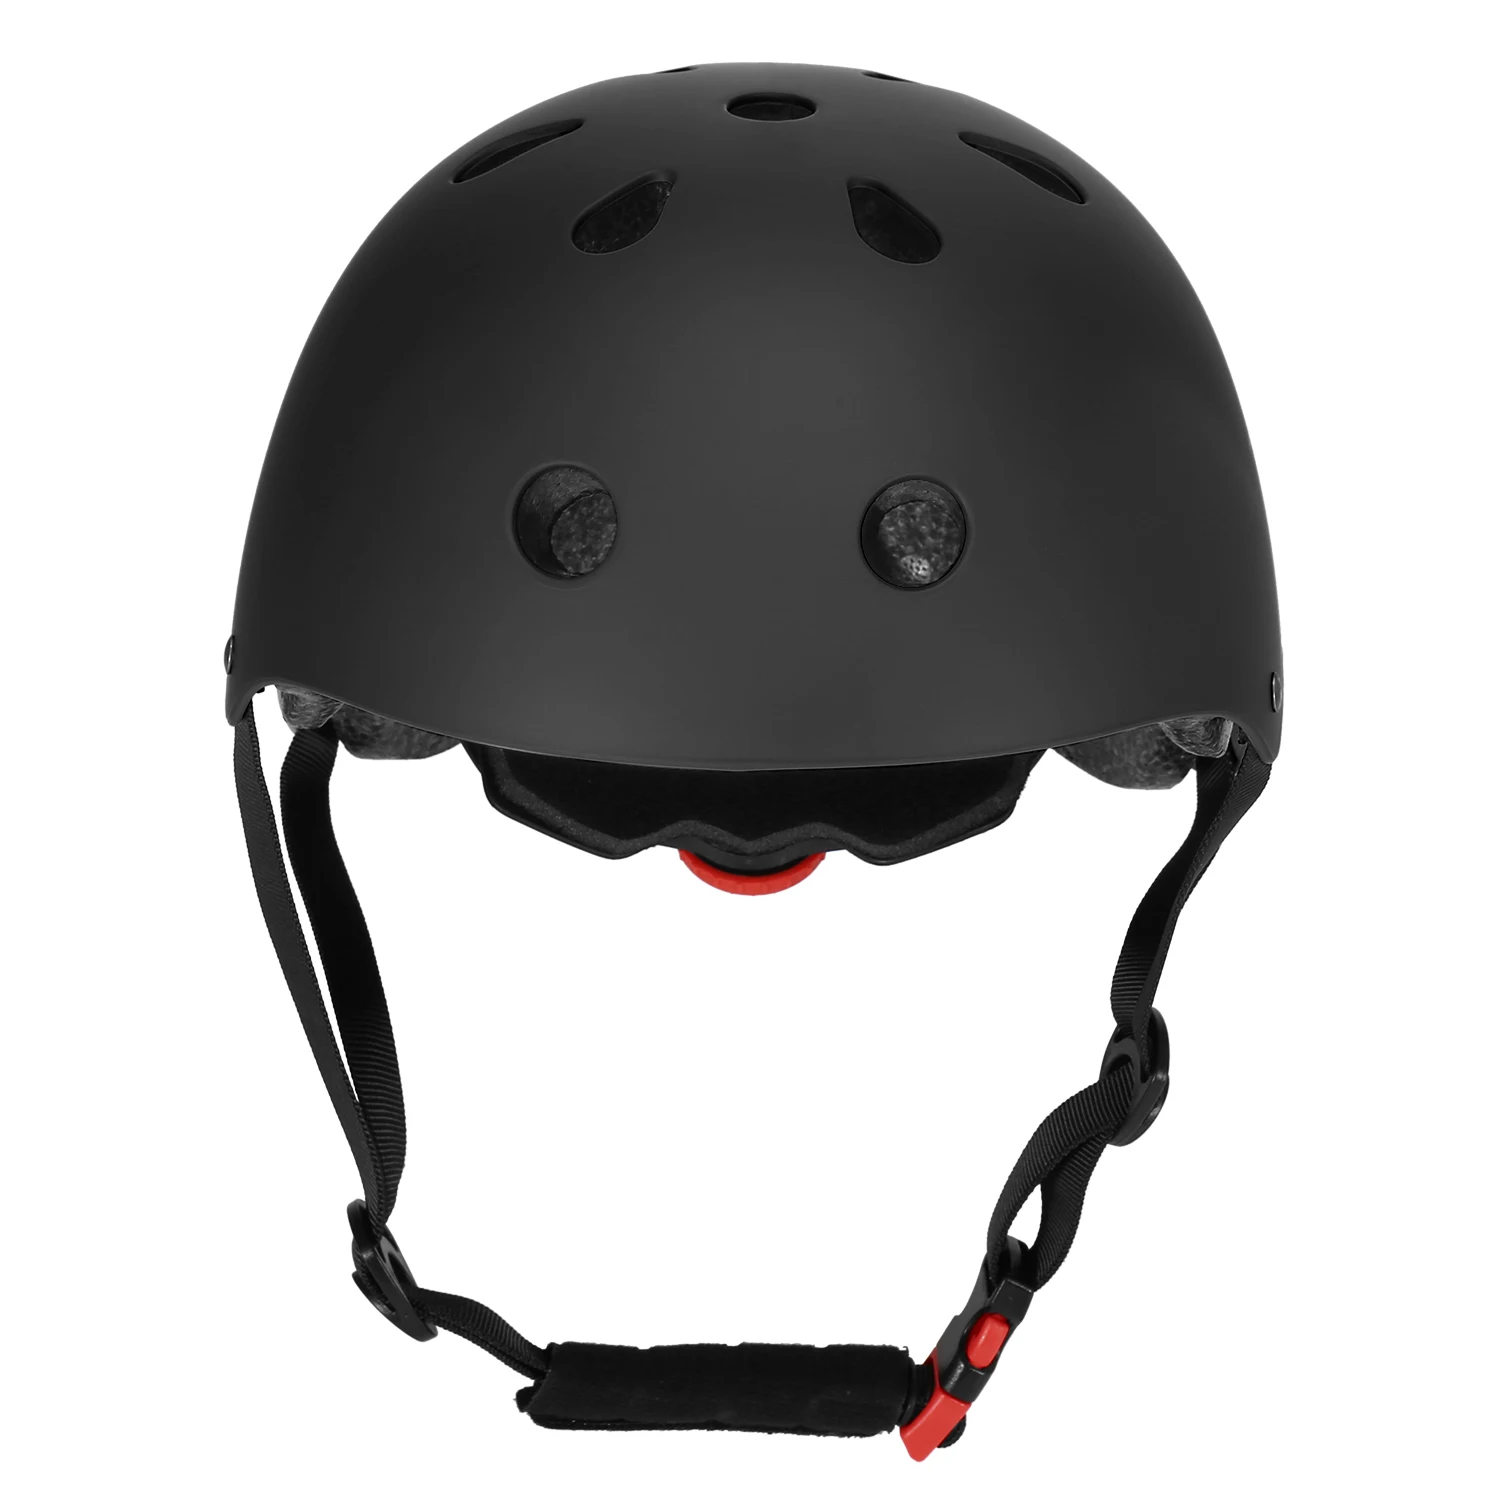 Black Includes Travel Bag Adjustable Sports Safety Helmet Multi-Sport Impact Protection Helmet for Children and Adults 